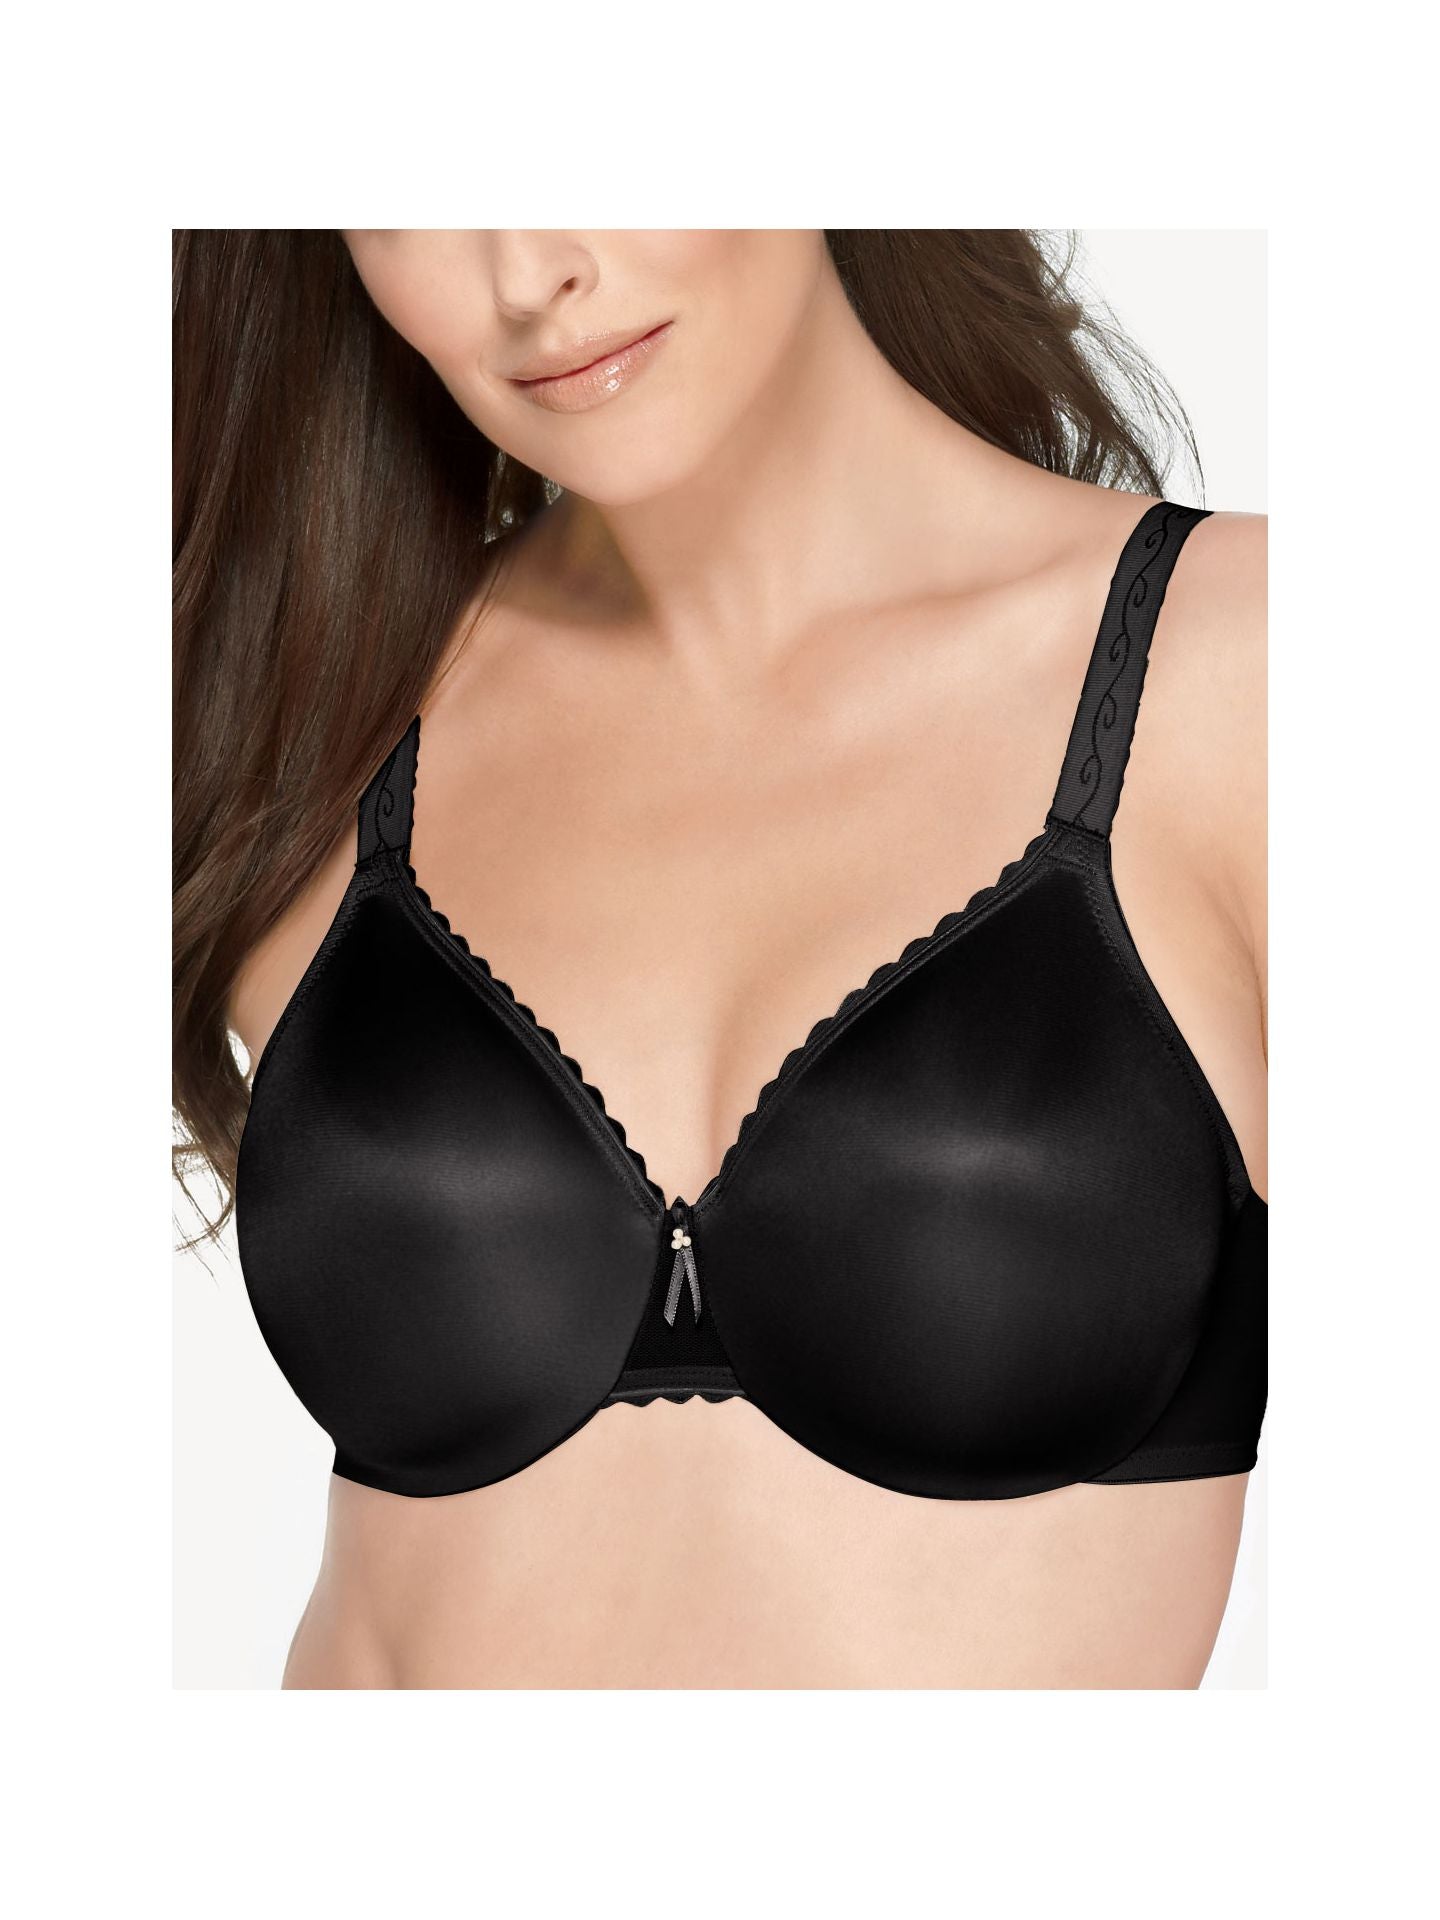 Women's Simple Shaping Full Coverage Underwire Minimizer Bra